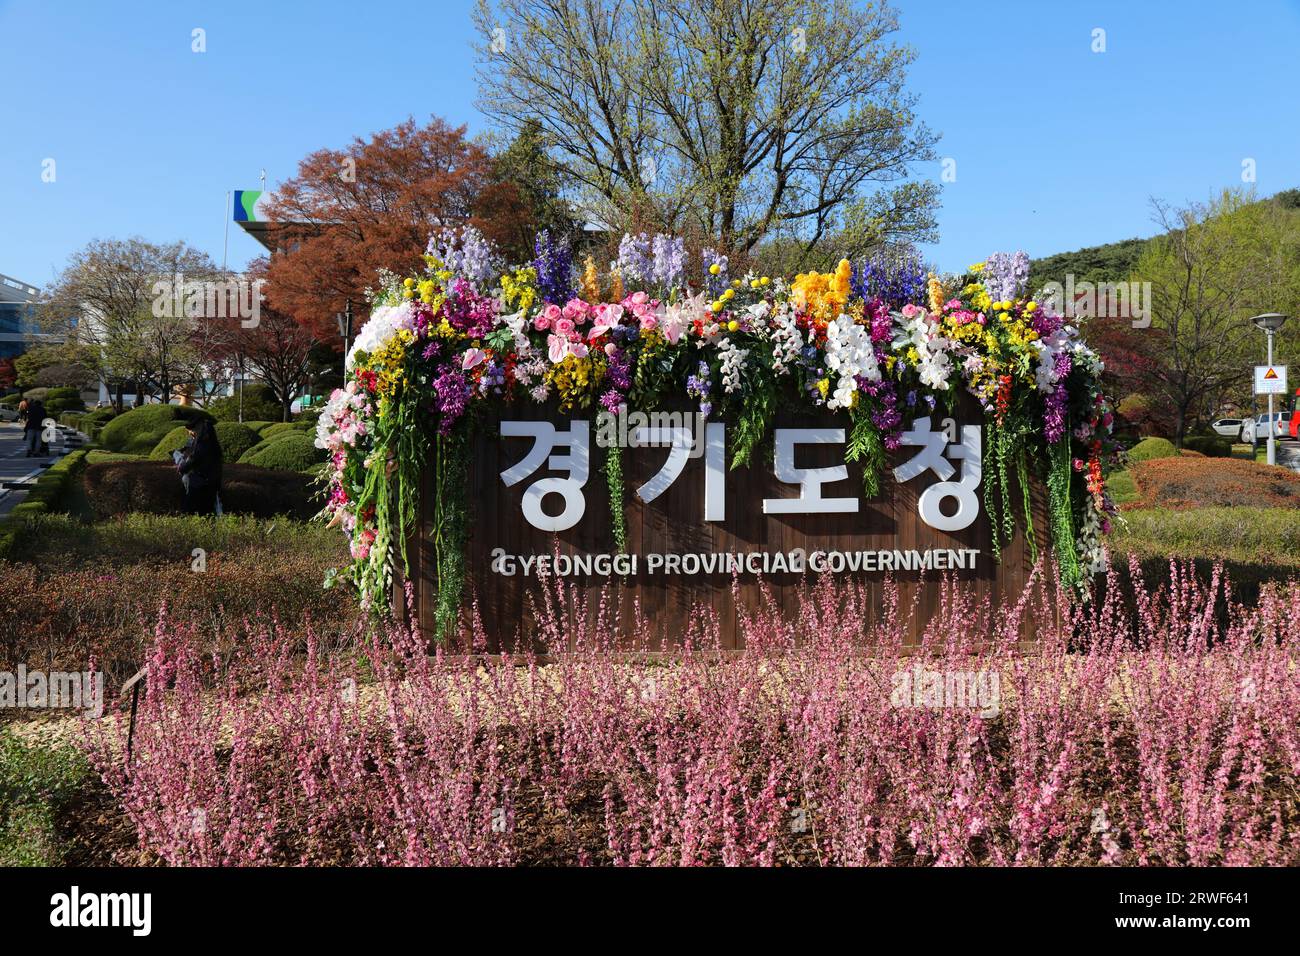 SUWON, SOUTH KOREA - APRIL 8, 2023: Flower decoration in front of Gyeonggi Provincial Government building in Suwon, the capital city of Gyeonggi provi Stock Photo